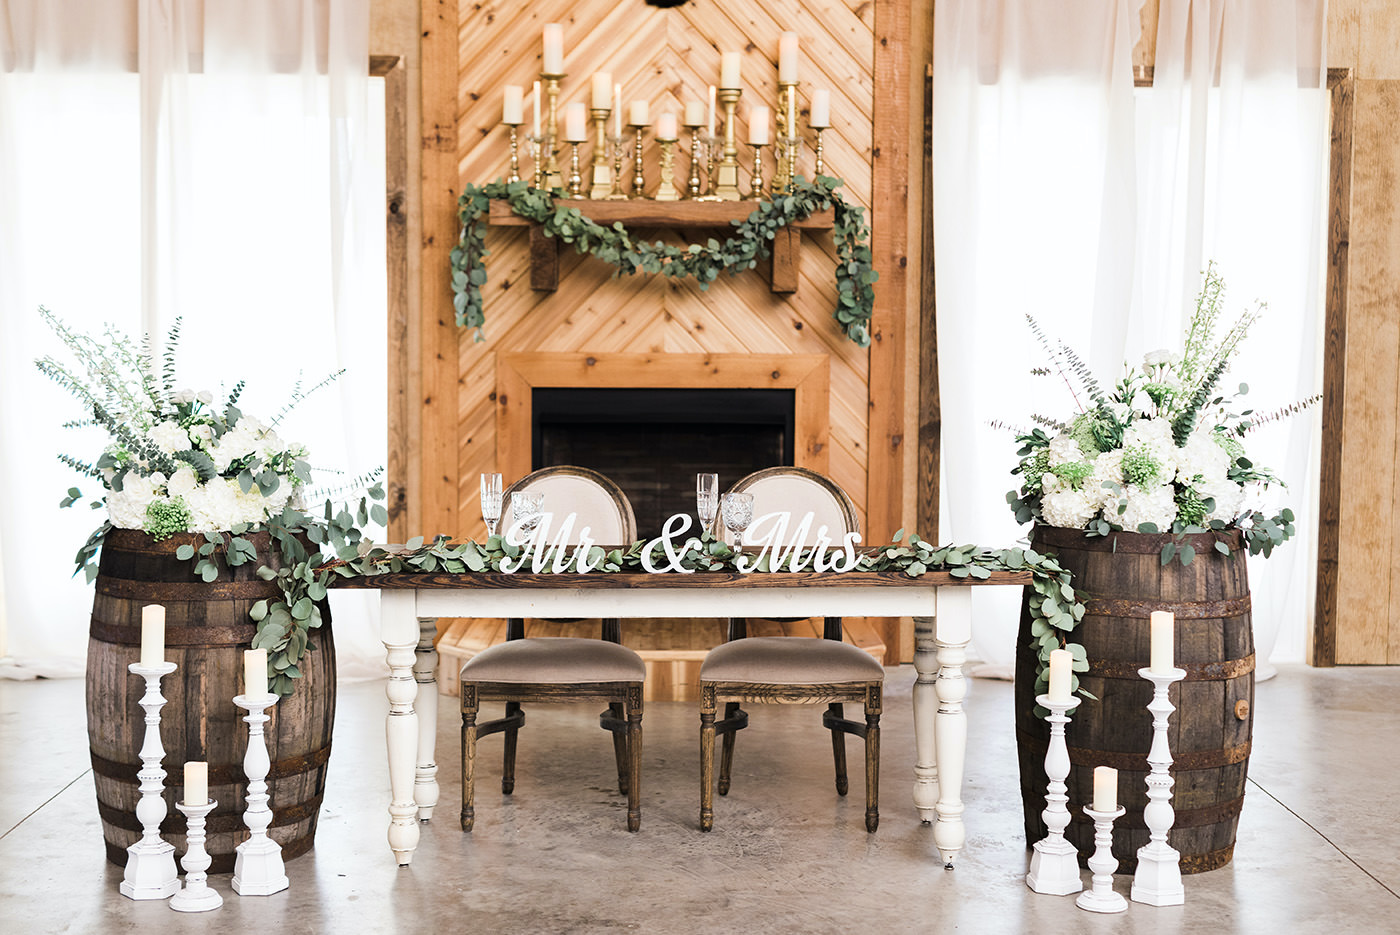 Rustic Chic Wedding Reception and Decor, Antique Farmhouse Sweetheart Table with Mr. and Mrs. Wooden Cut Out, Green Eucalyptus Leaf Garland, White Roses, Ivory Florals and Greenery | Covington Farm | Florida Wedding Planner and Floral Designer John Campbell Weddings | Tampa Bay Caterer Olympia Catering